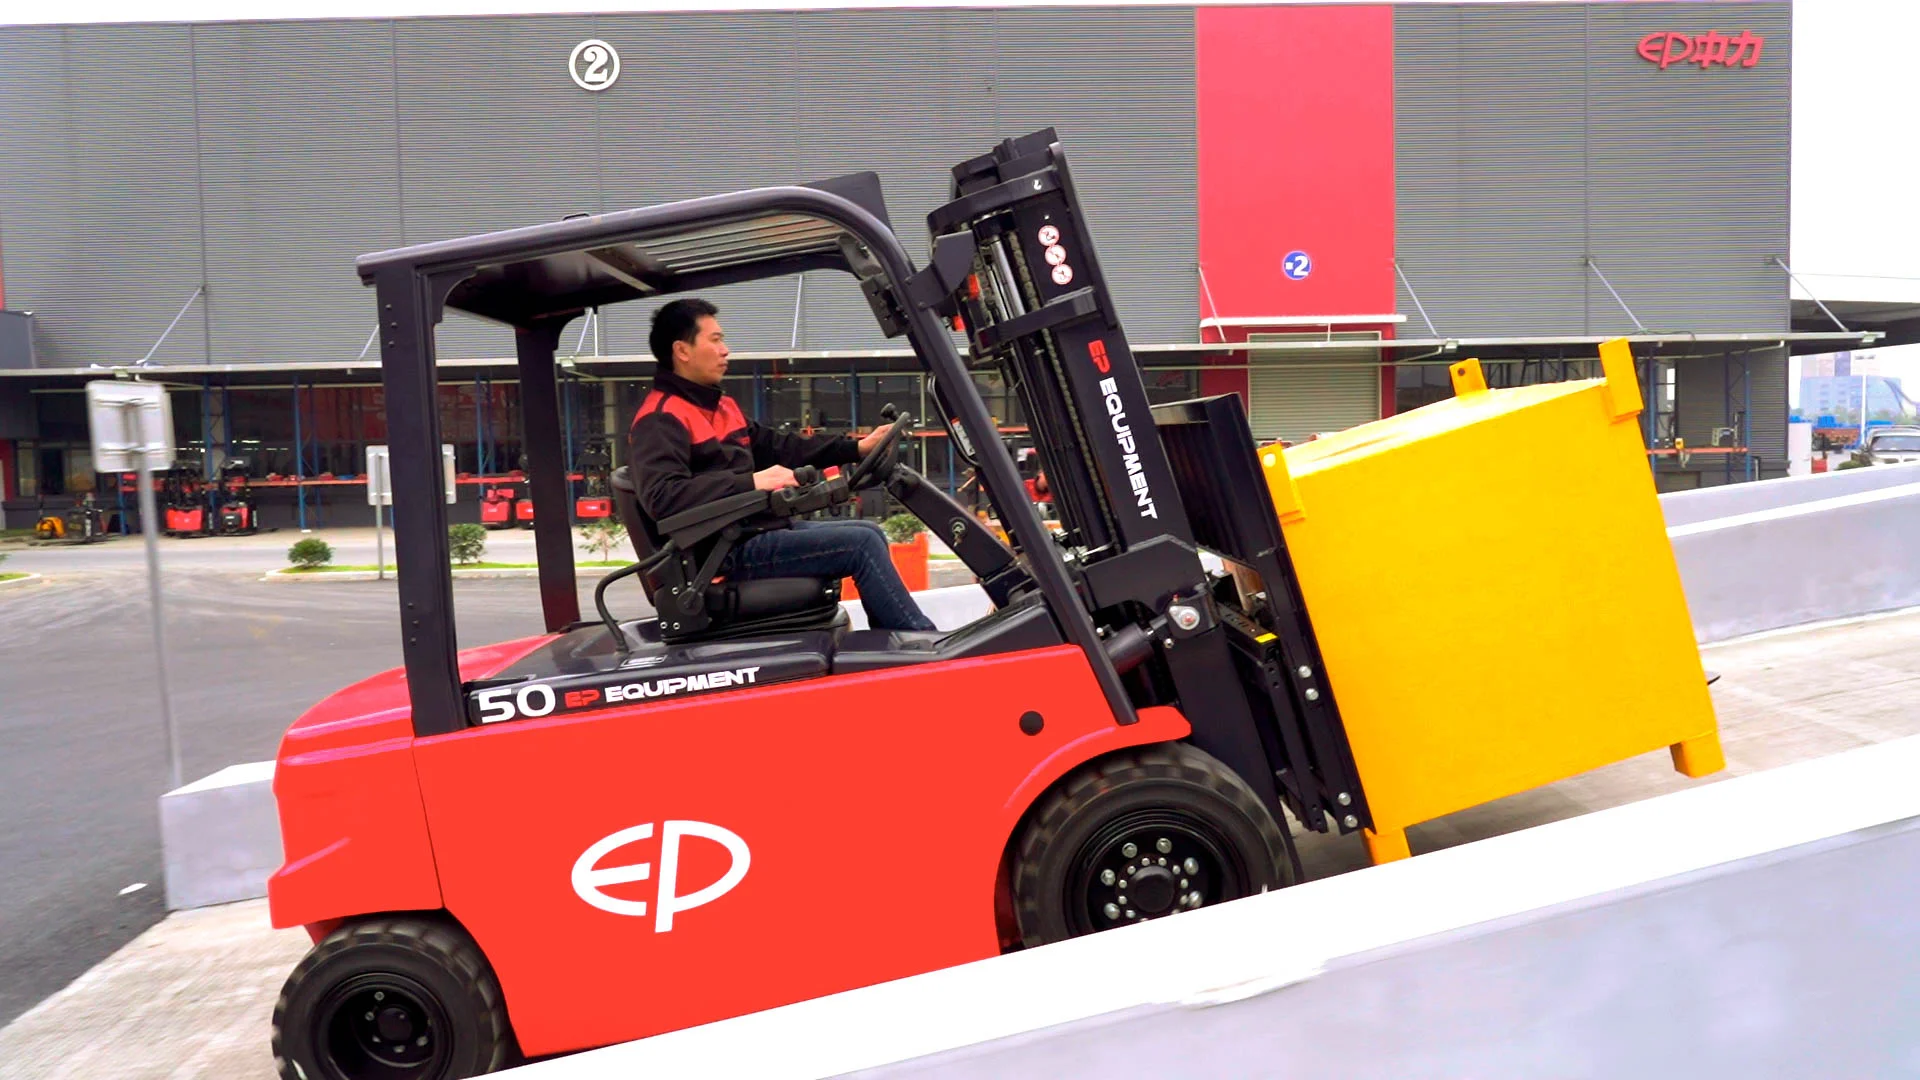 CPD50L1 electric counterbalance forklift being operated on a ramp.